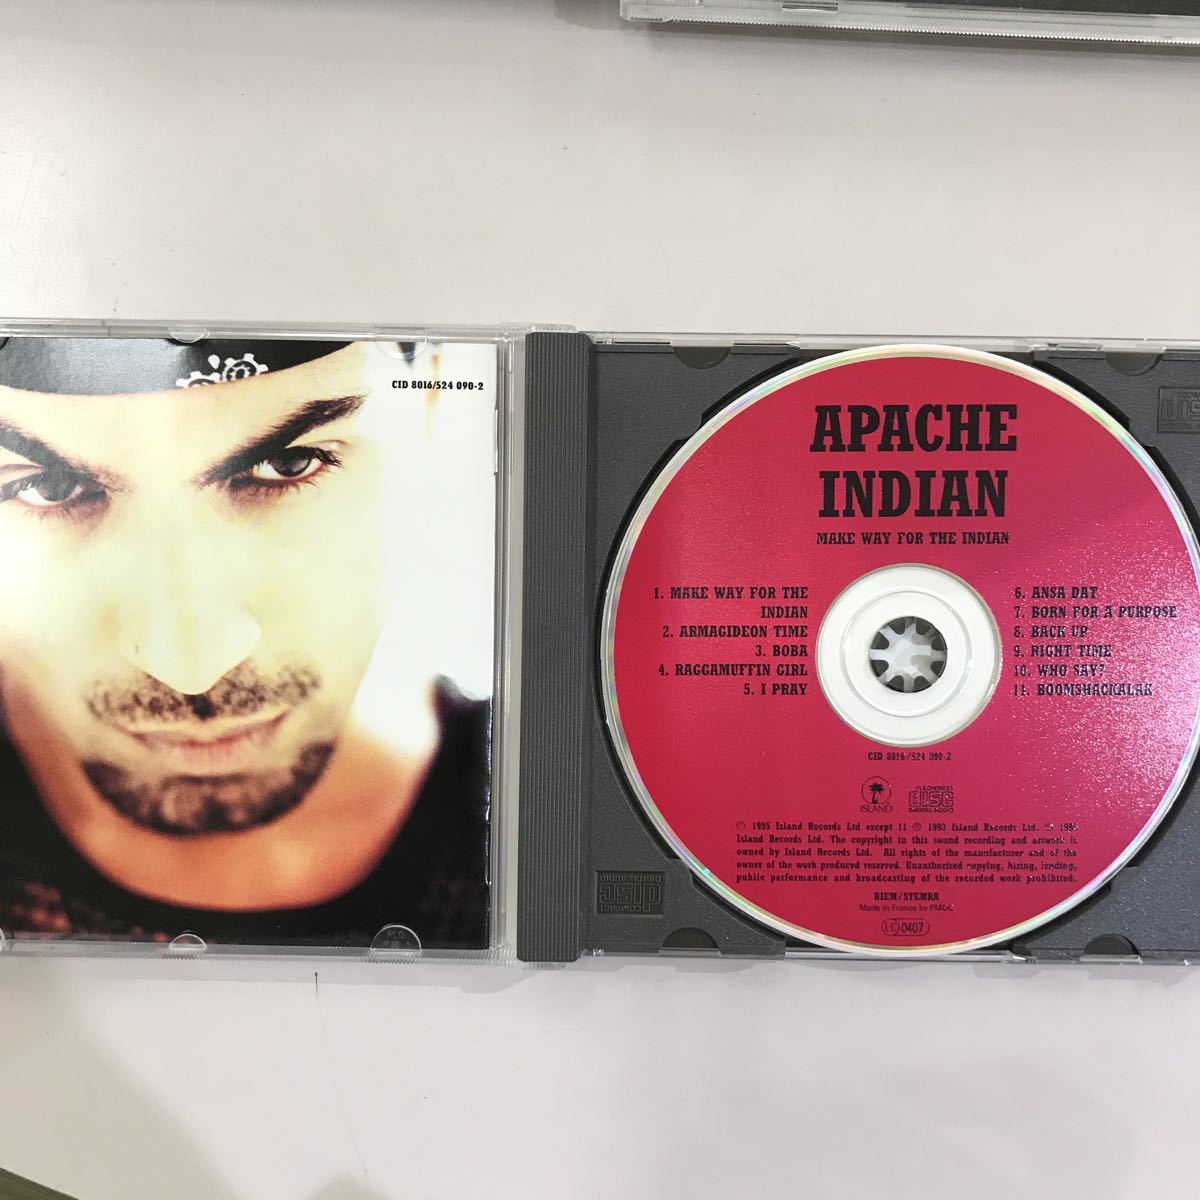 CD 中古☆【洋楽】APACHE INDIAN Make Way For The Indian